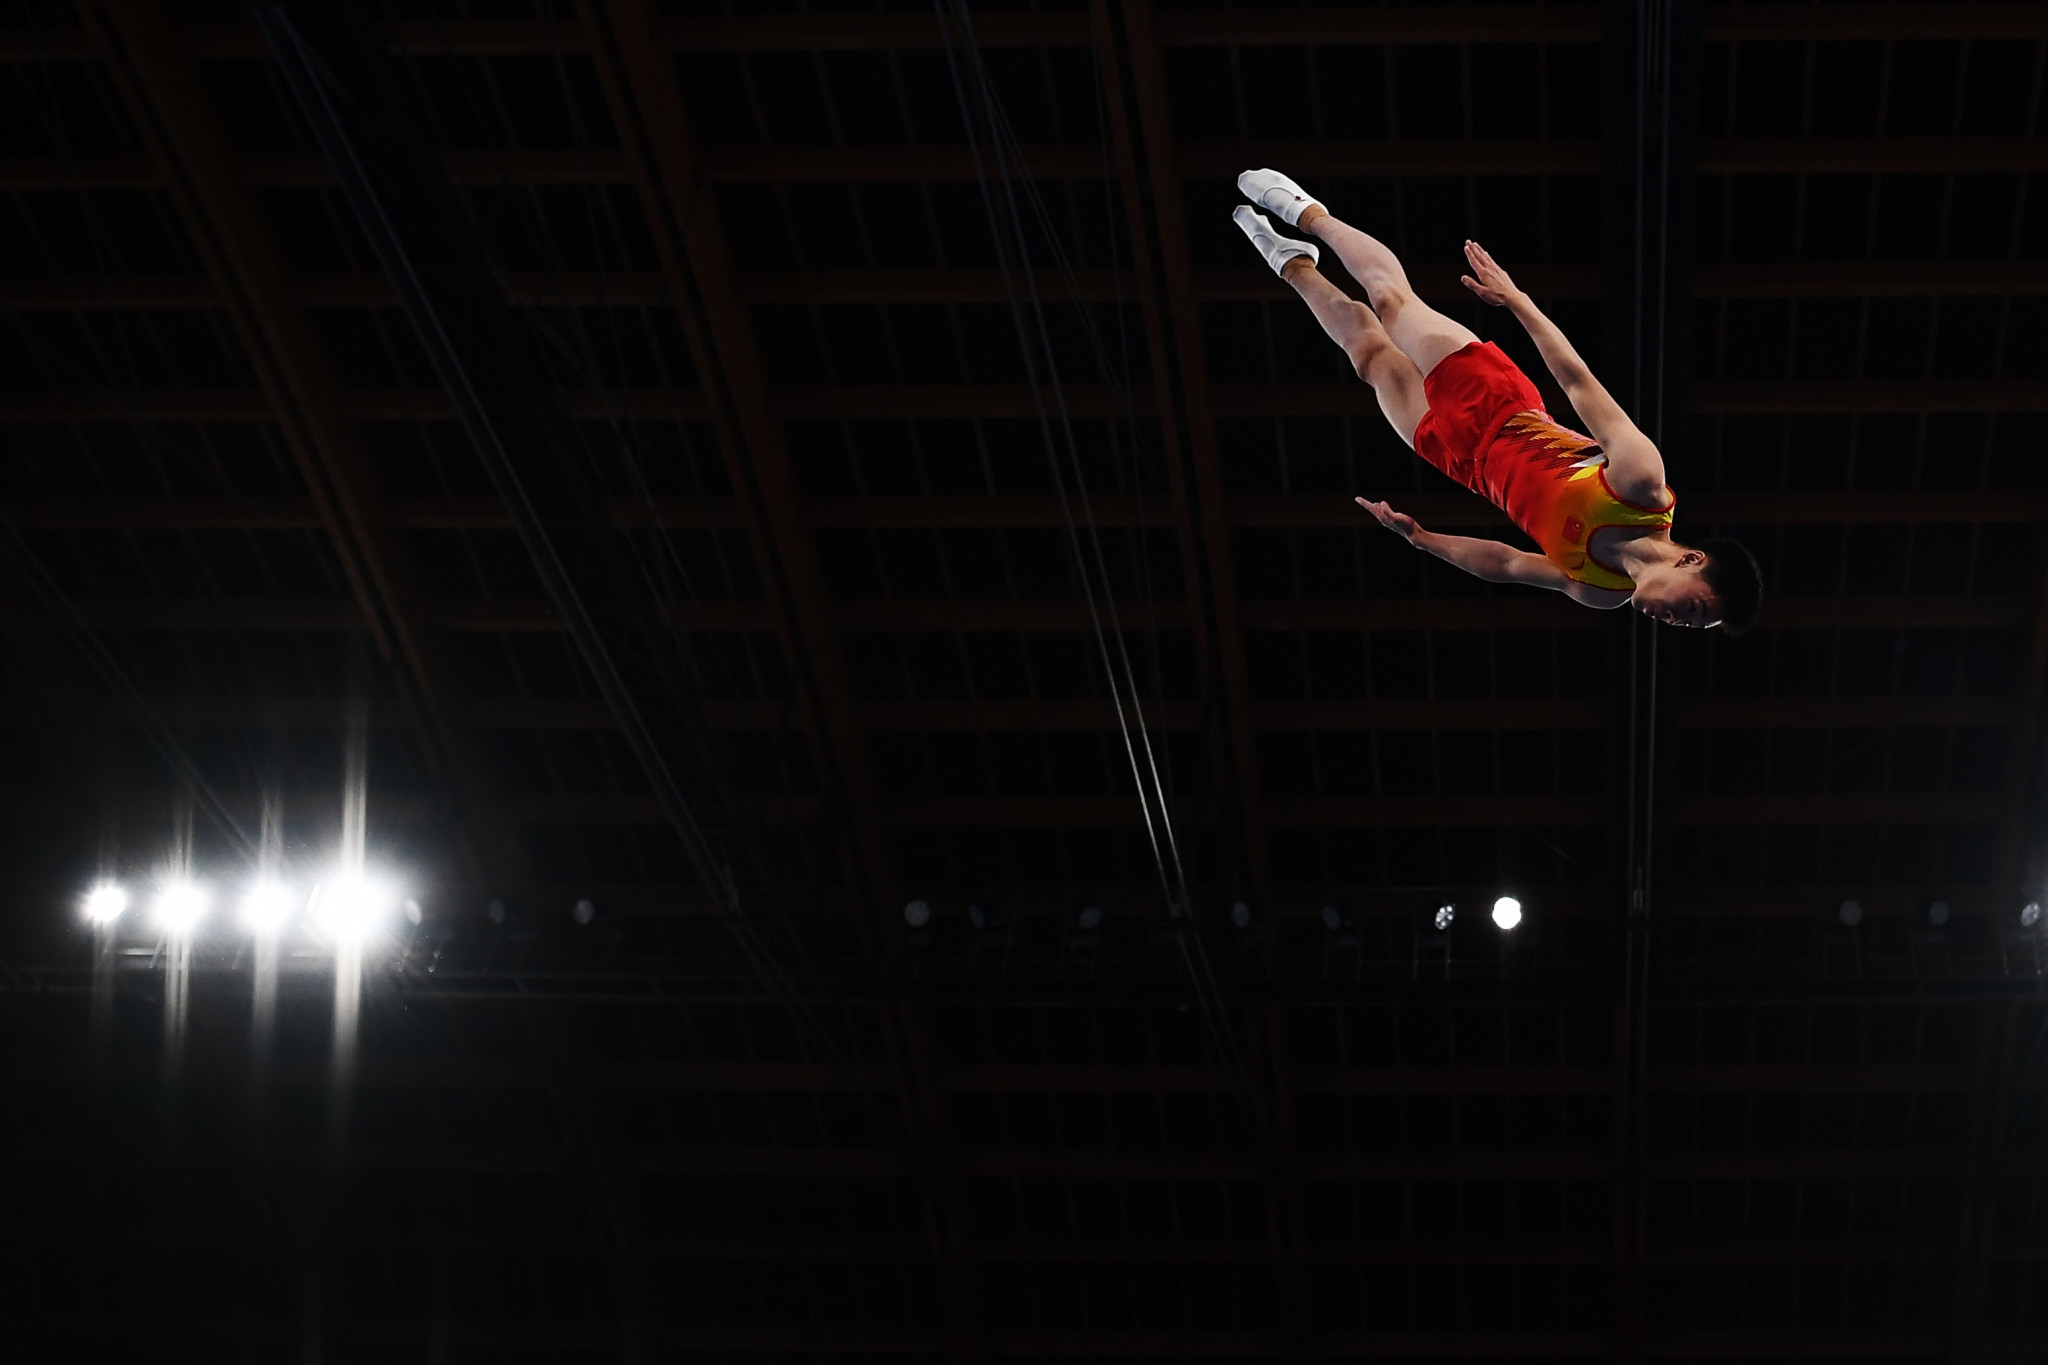 Gao successor to be crowned at FIG Trampoline World Championships in Baku